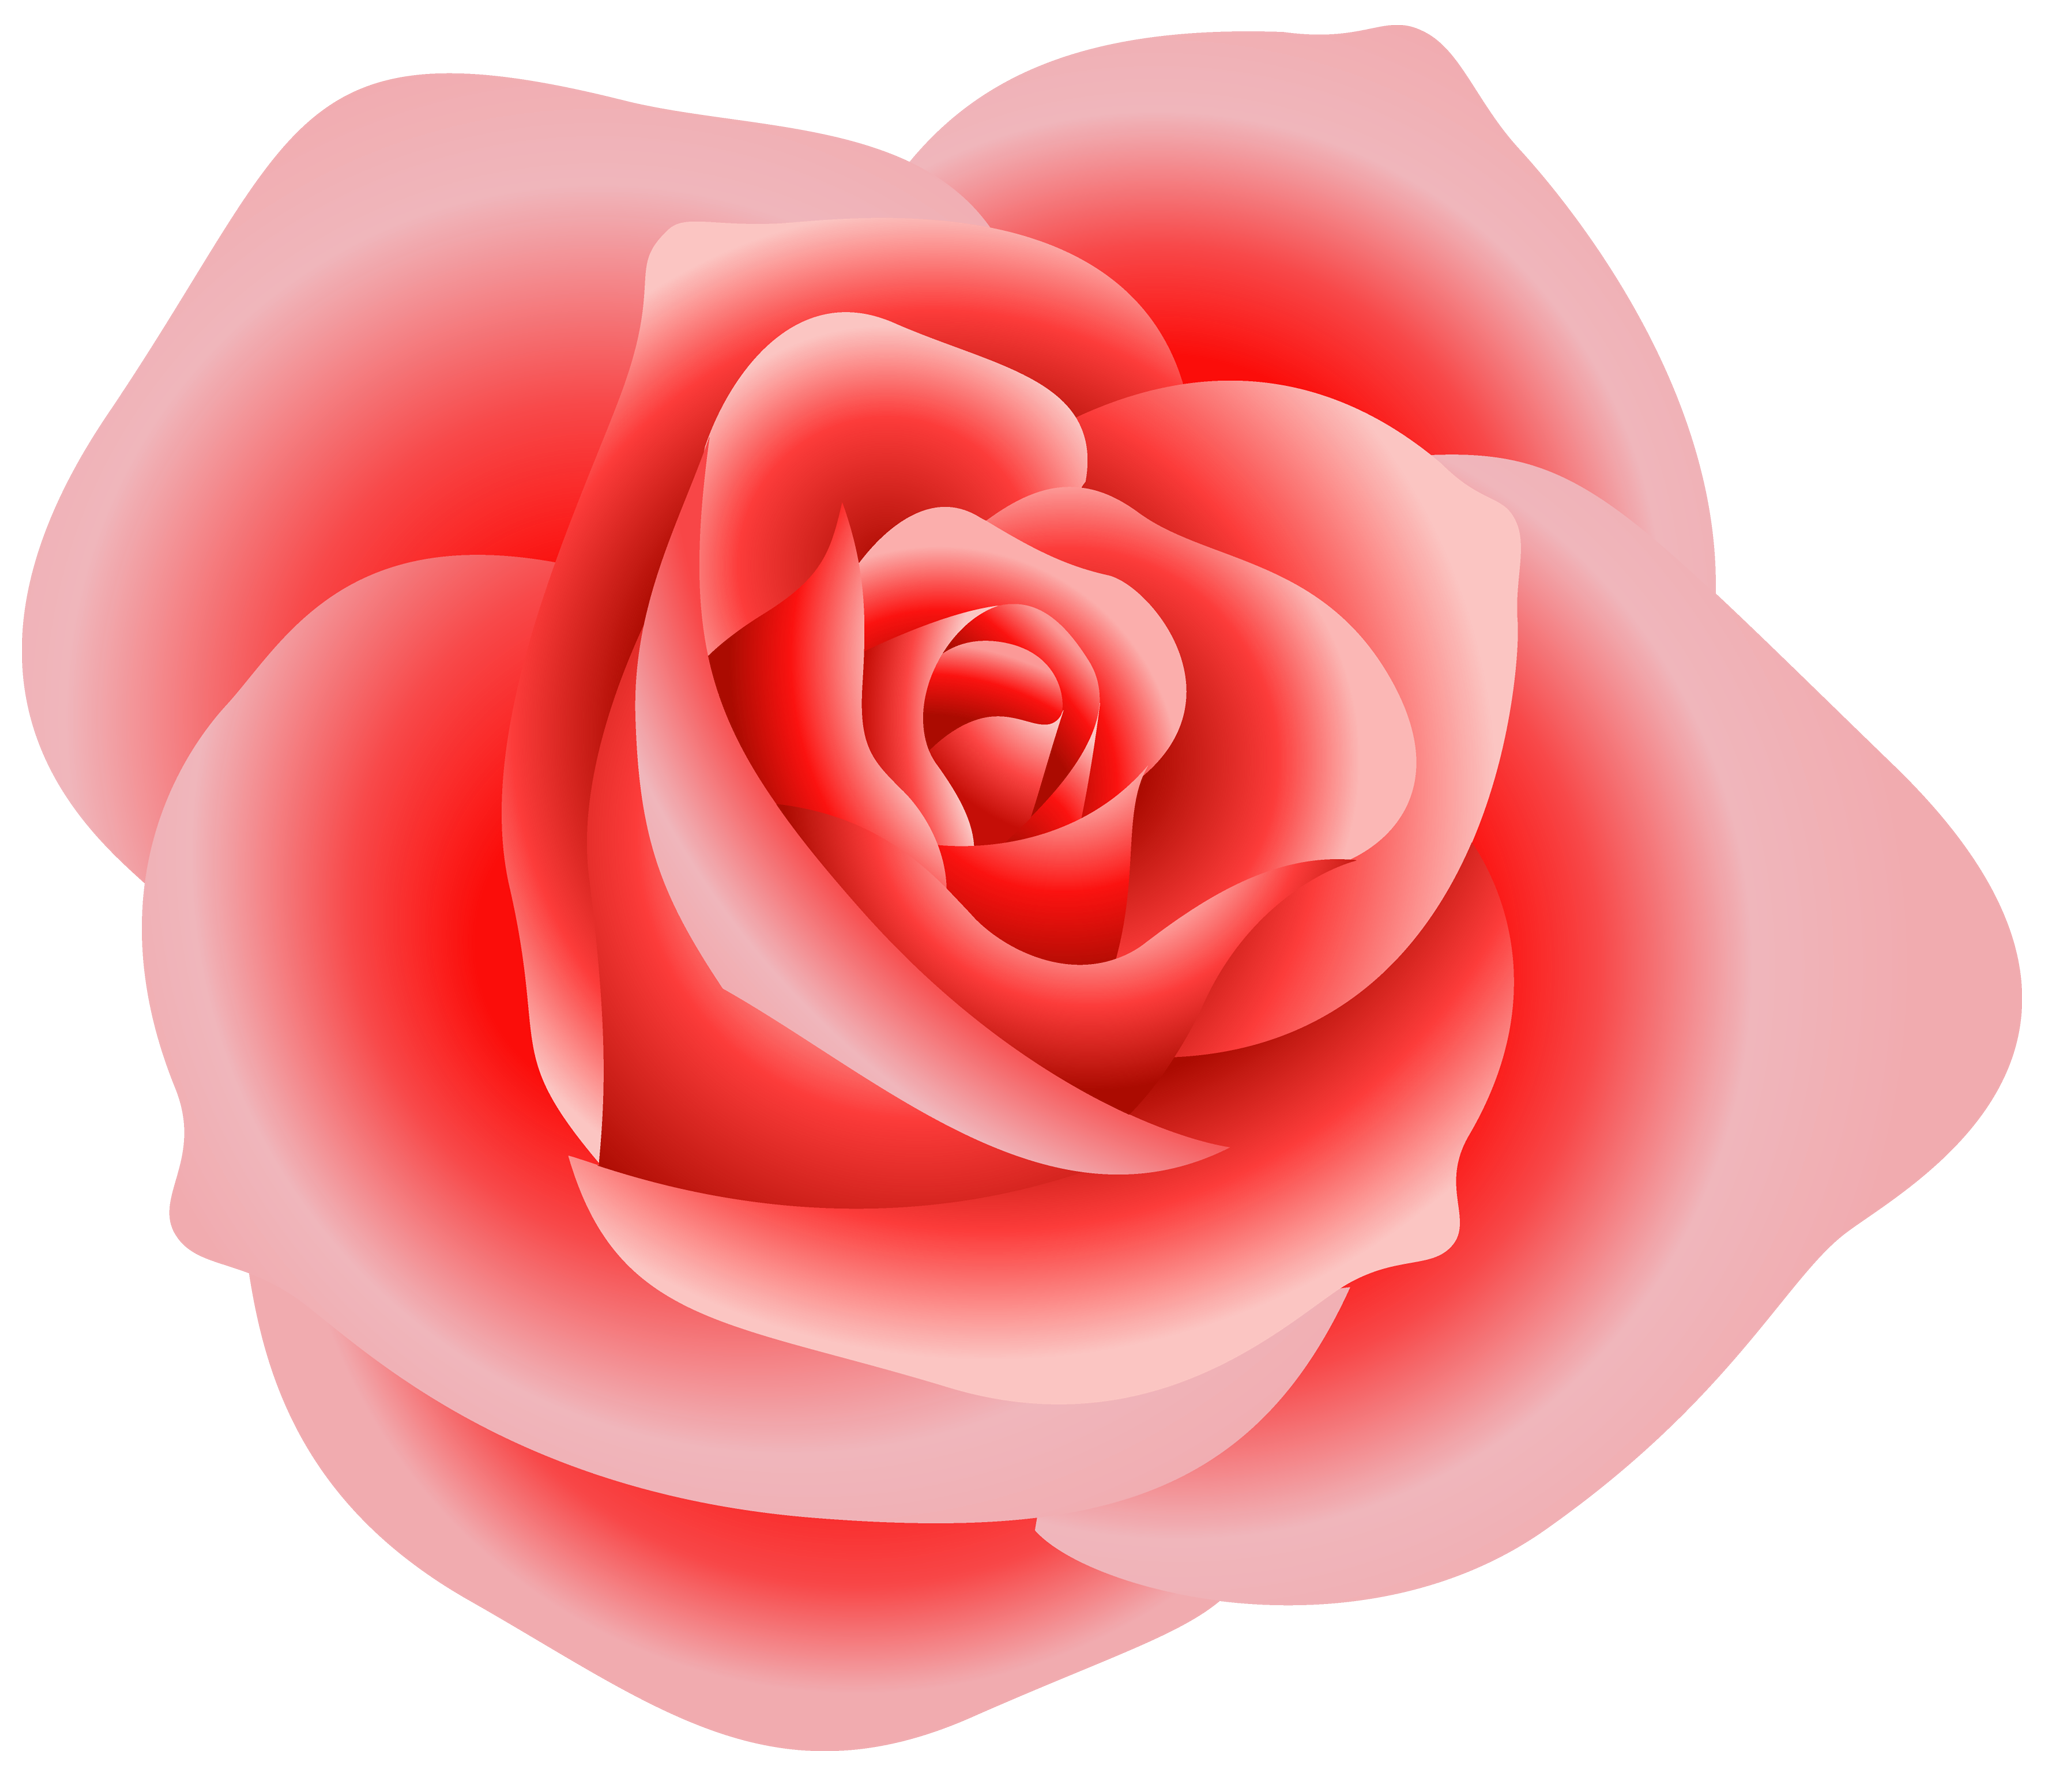 roses clipart images - photo #40